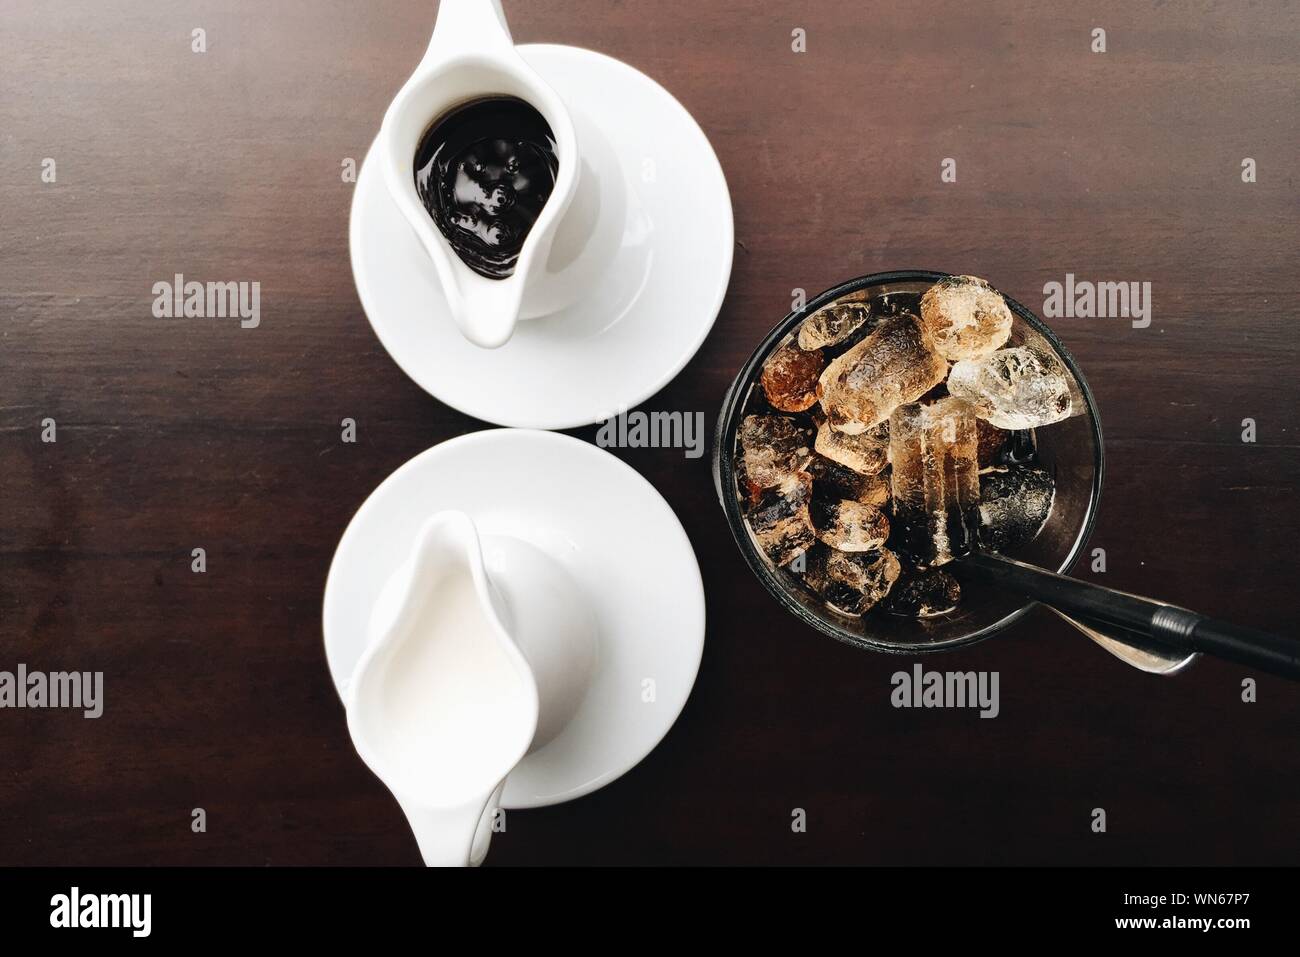 Directly Above Of Coffee Indulgence On Table Stock Photo